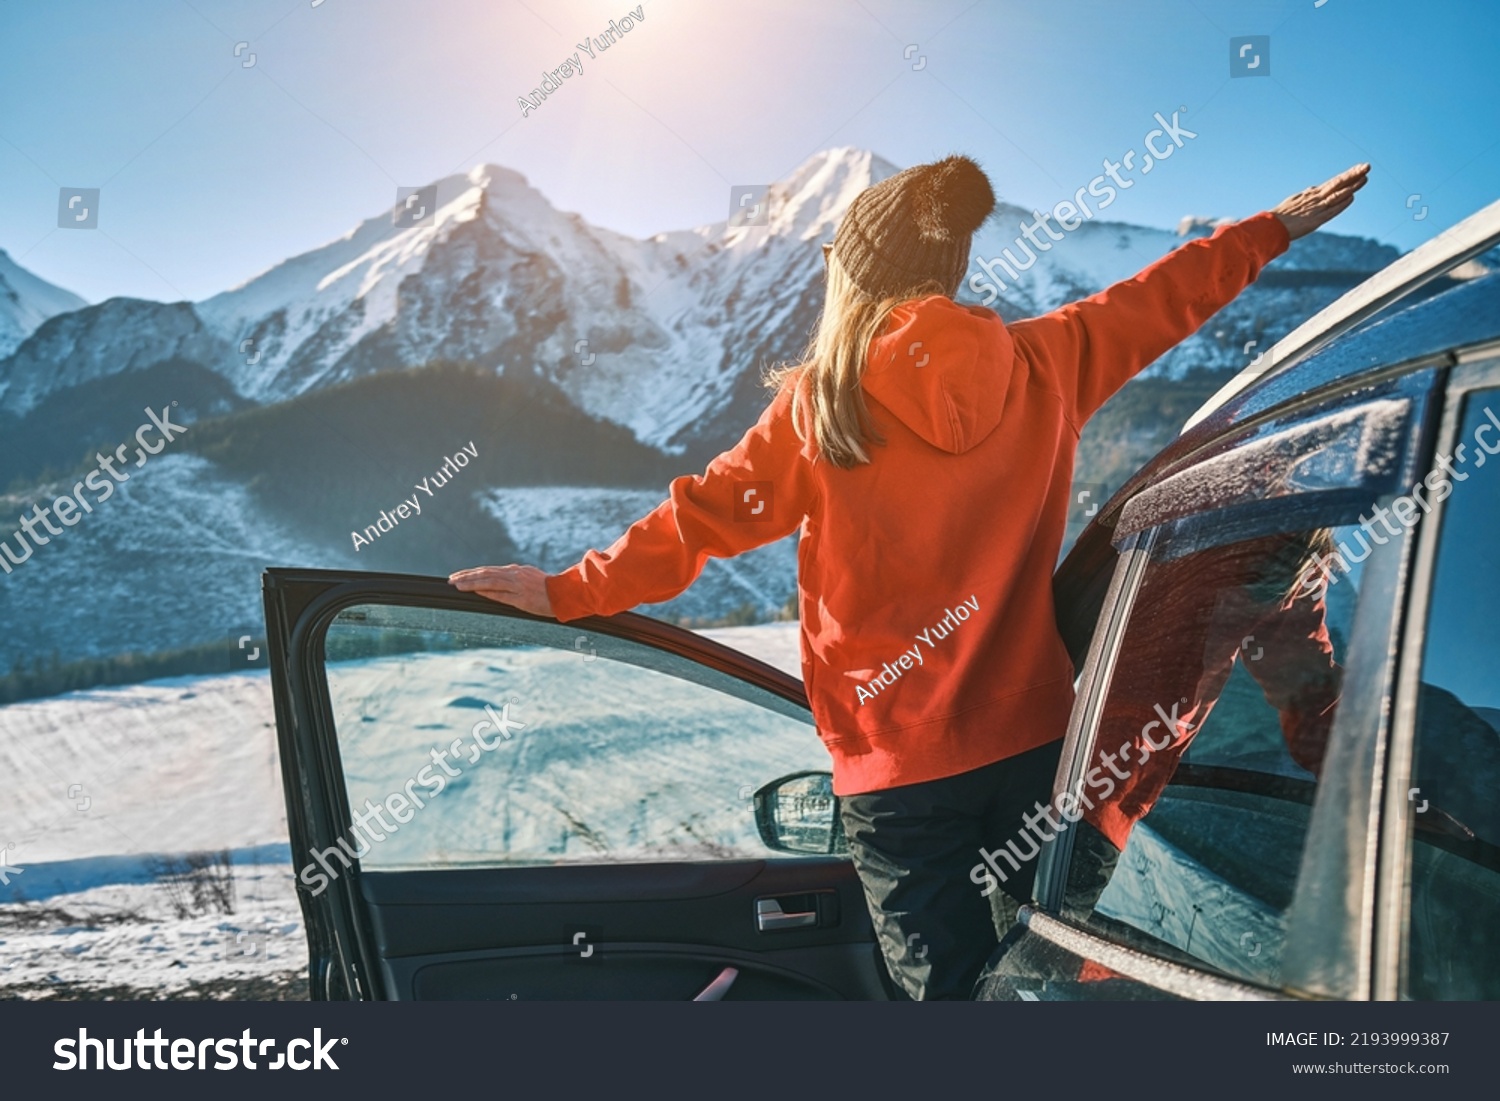 Woman traveling exploring, enjoying the view of the mountains, landscape, lifestyle concept winter vacation outdoors. Female standing near the car in sunny day, travel in the mountains, freedom #2193999387